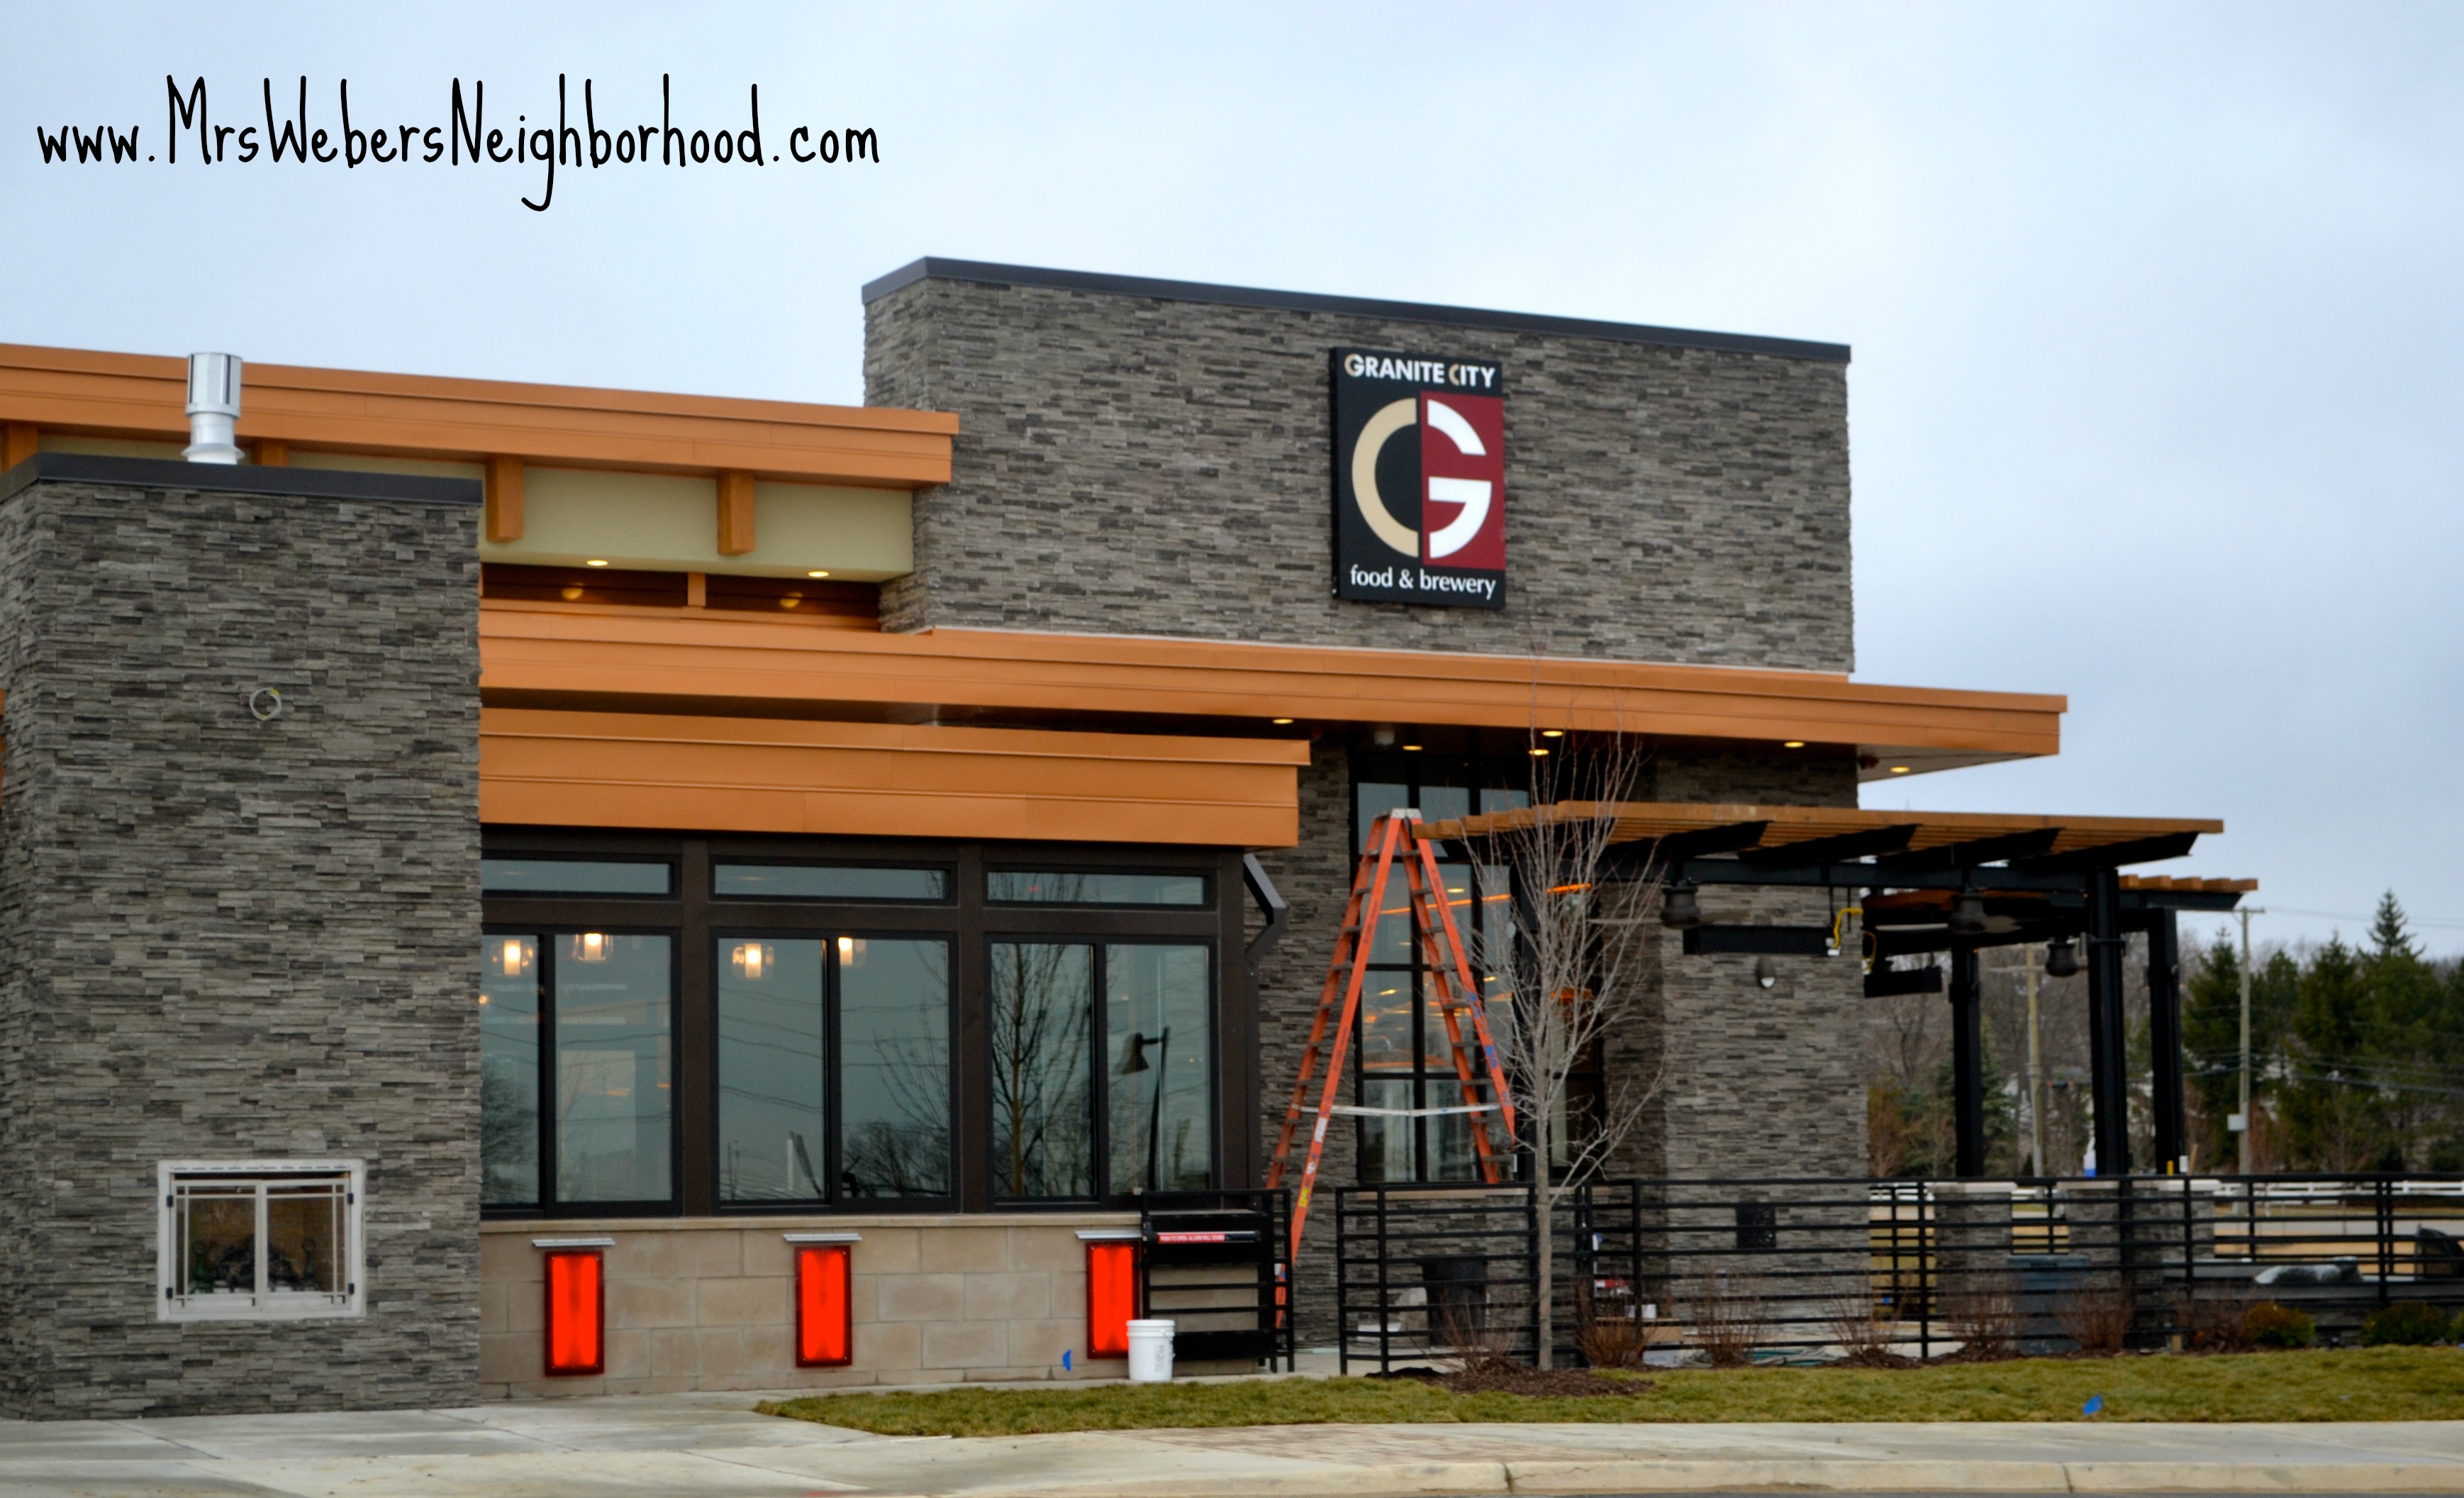 11 Reasons To Visit Granite City Northville {+ $25 Gift Card Giveaway